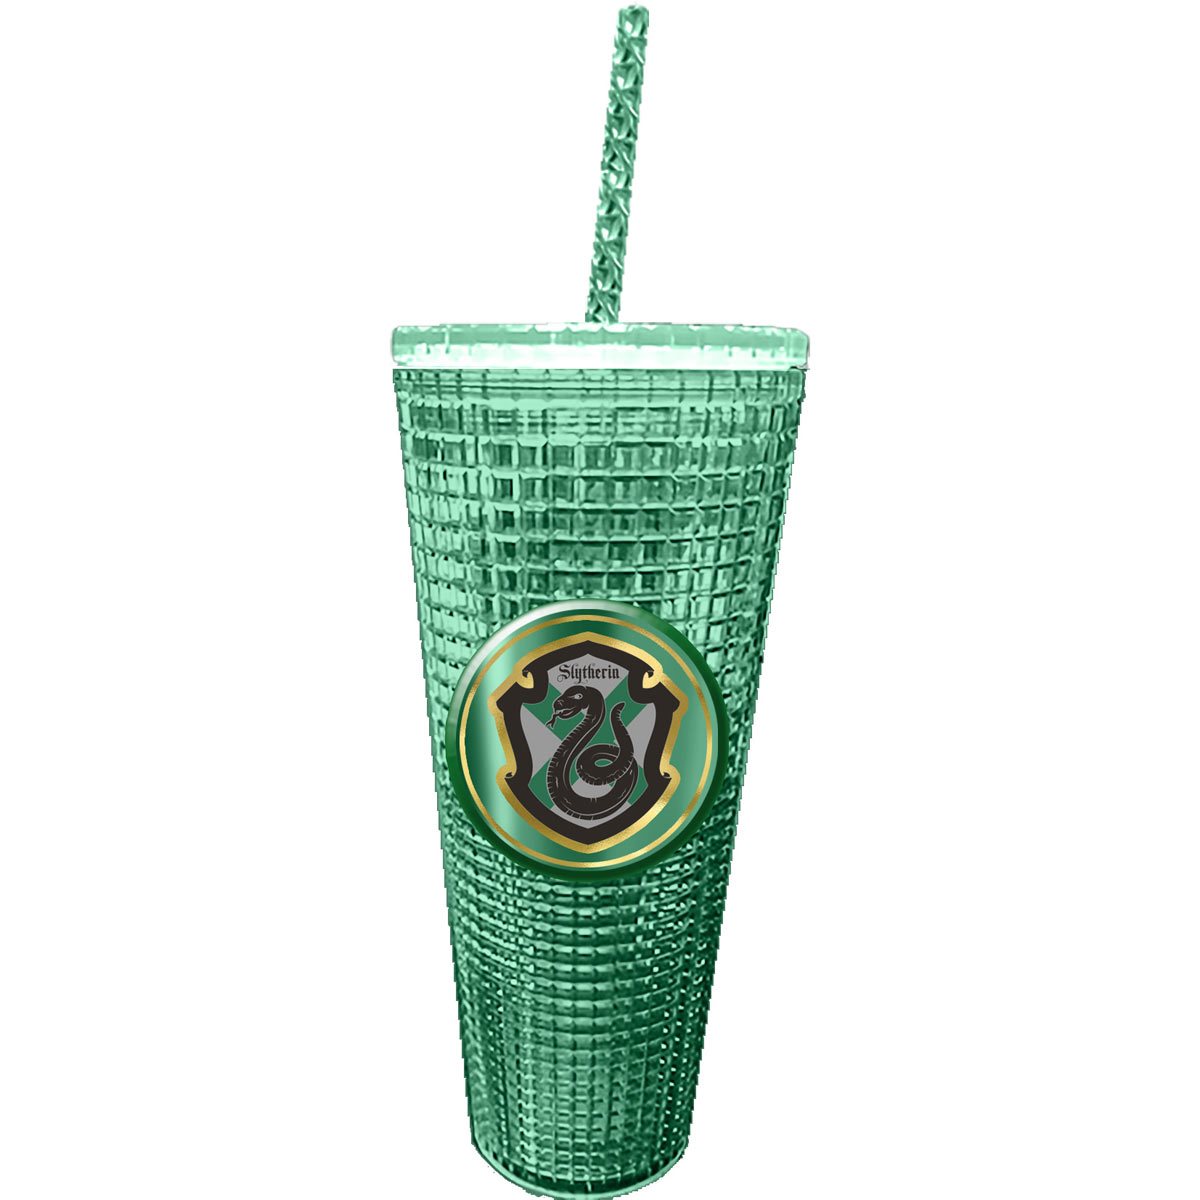 Harry Potter Solemnly Swear 20 oz. Glitter Travel Cup with Straw